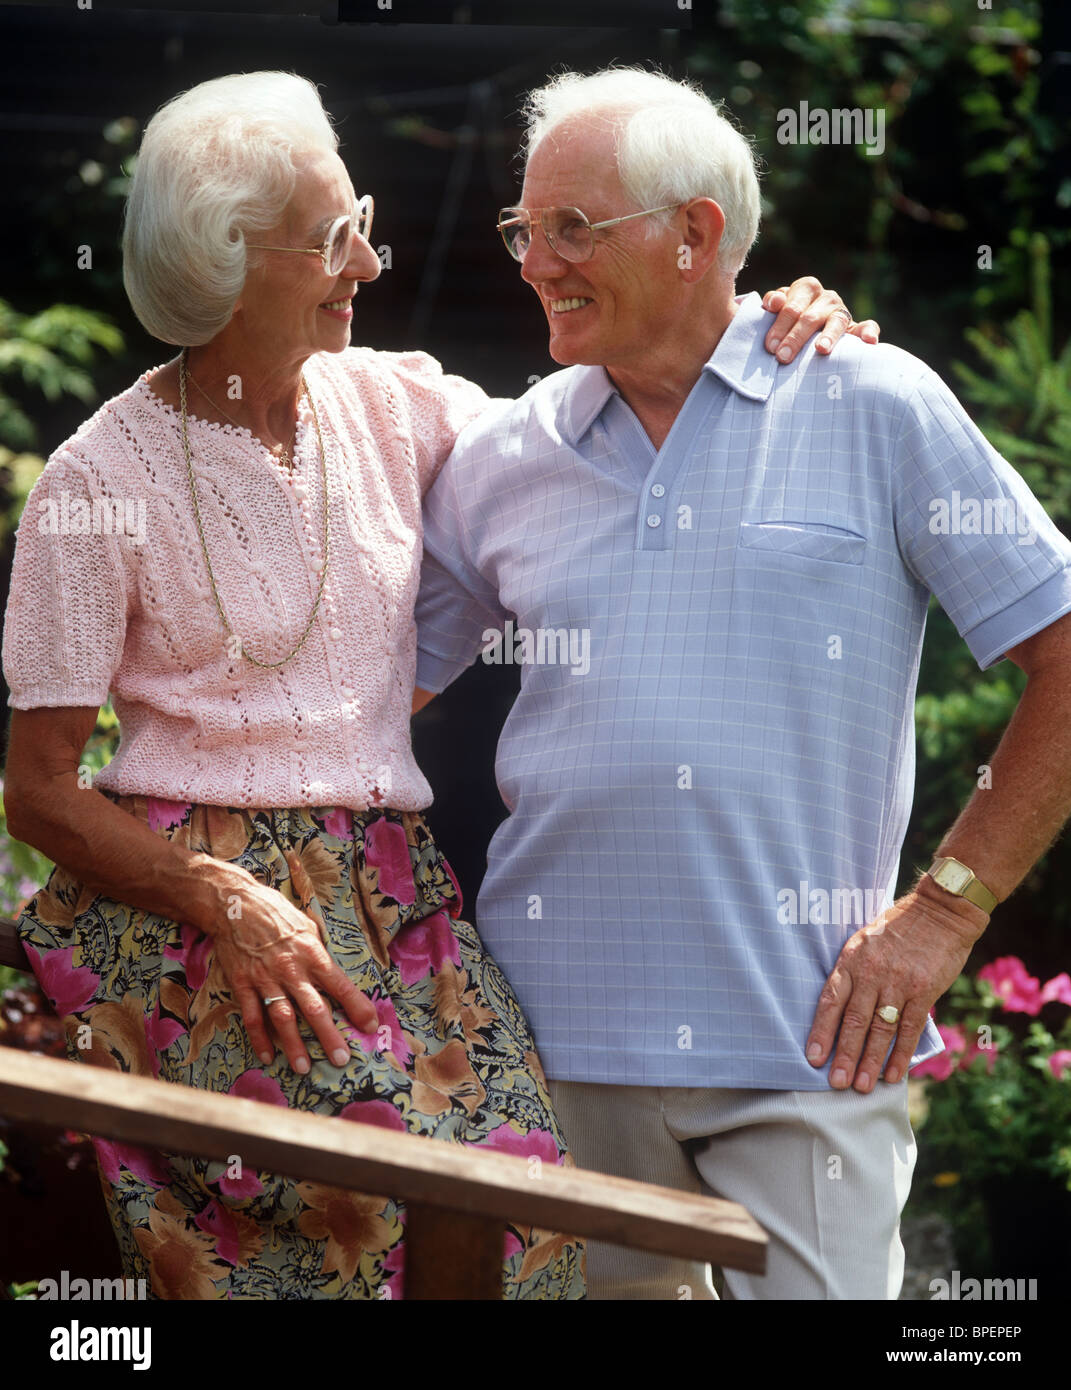 Old couple outdoors laughing in an embrace Stock Photo